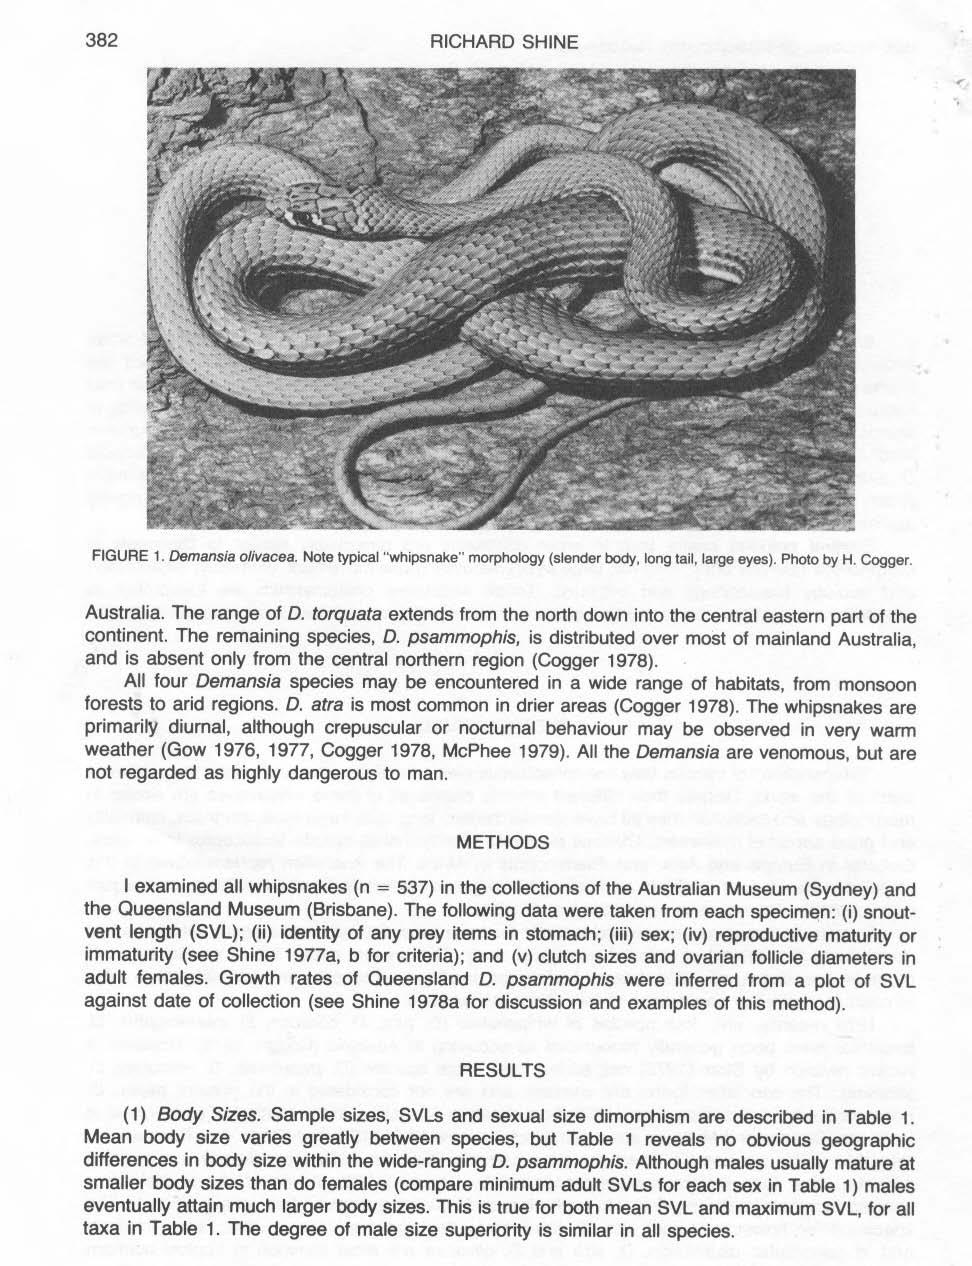 38 RICHARD SHINE <: '; FIGURE Demansia olivacea Note typical "whipsnake" morphology (slender body, long tail, large eyes) Photo by H Cogger Australia The range of D torquata extends from the north